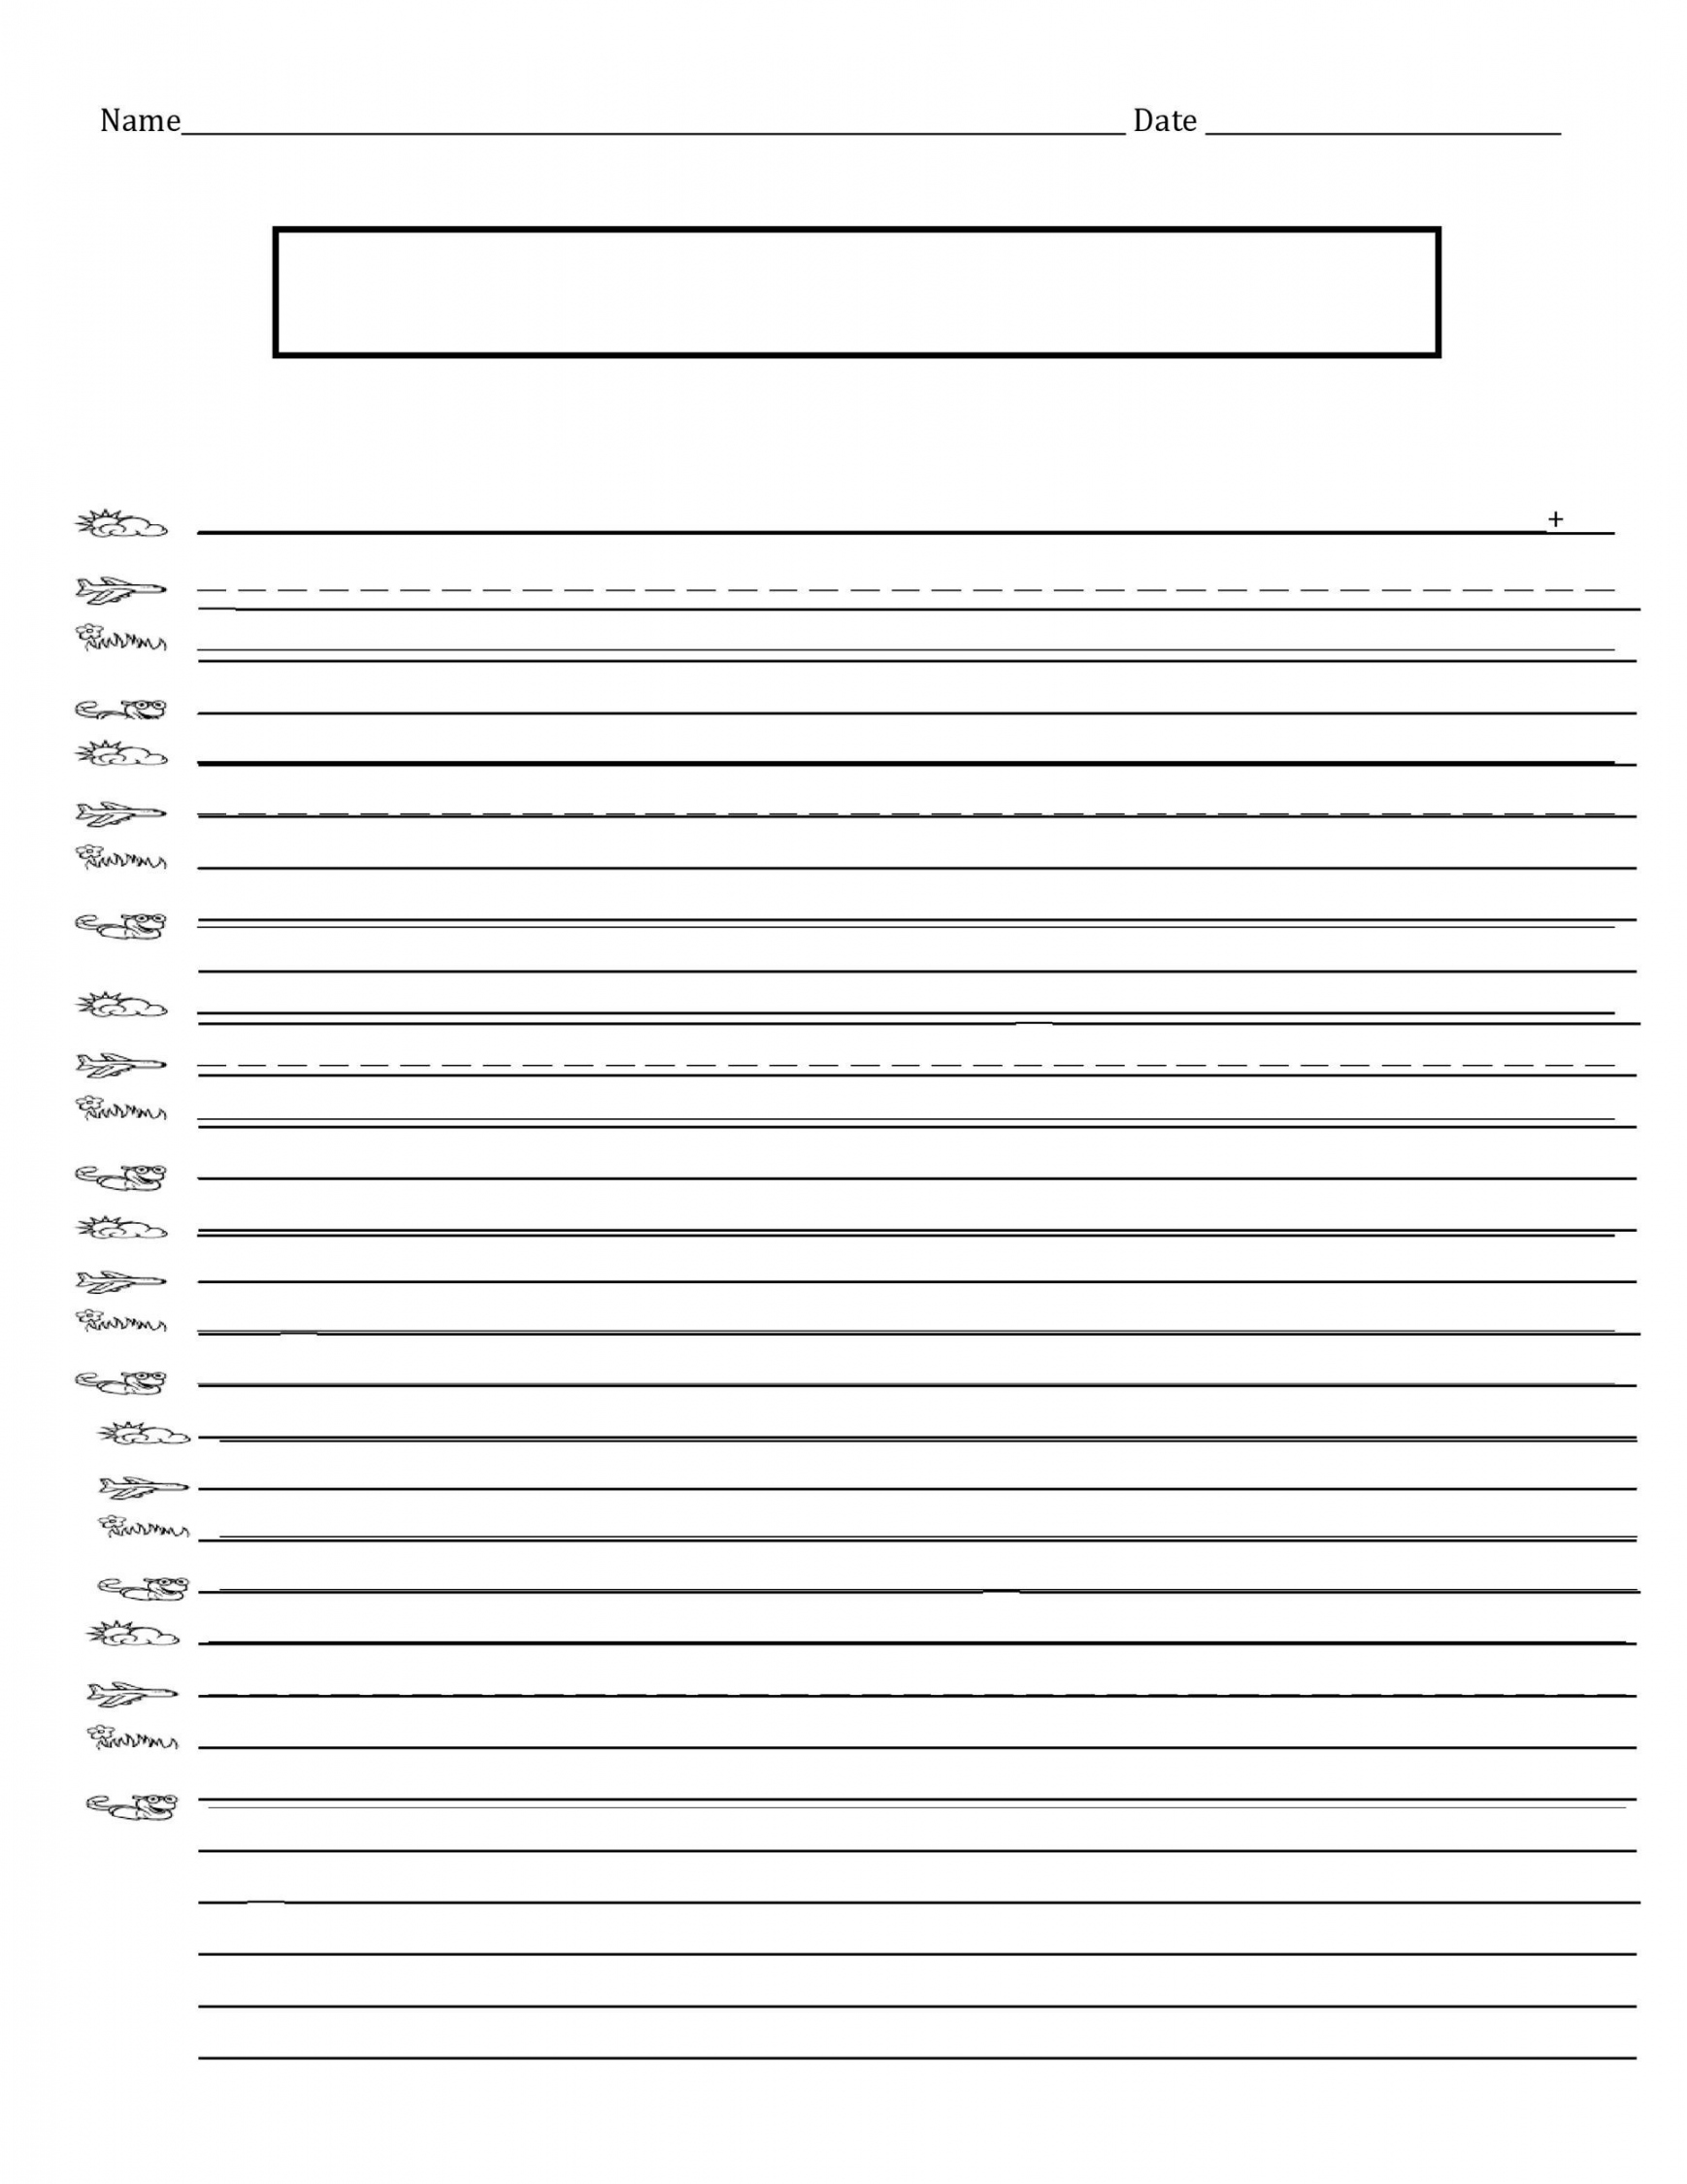 Printable Lined Paper Templates ᐅ TemplateLab - FREE Printables - Blank Writing Paper